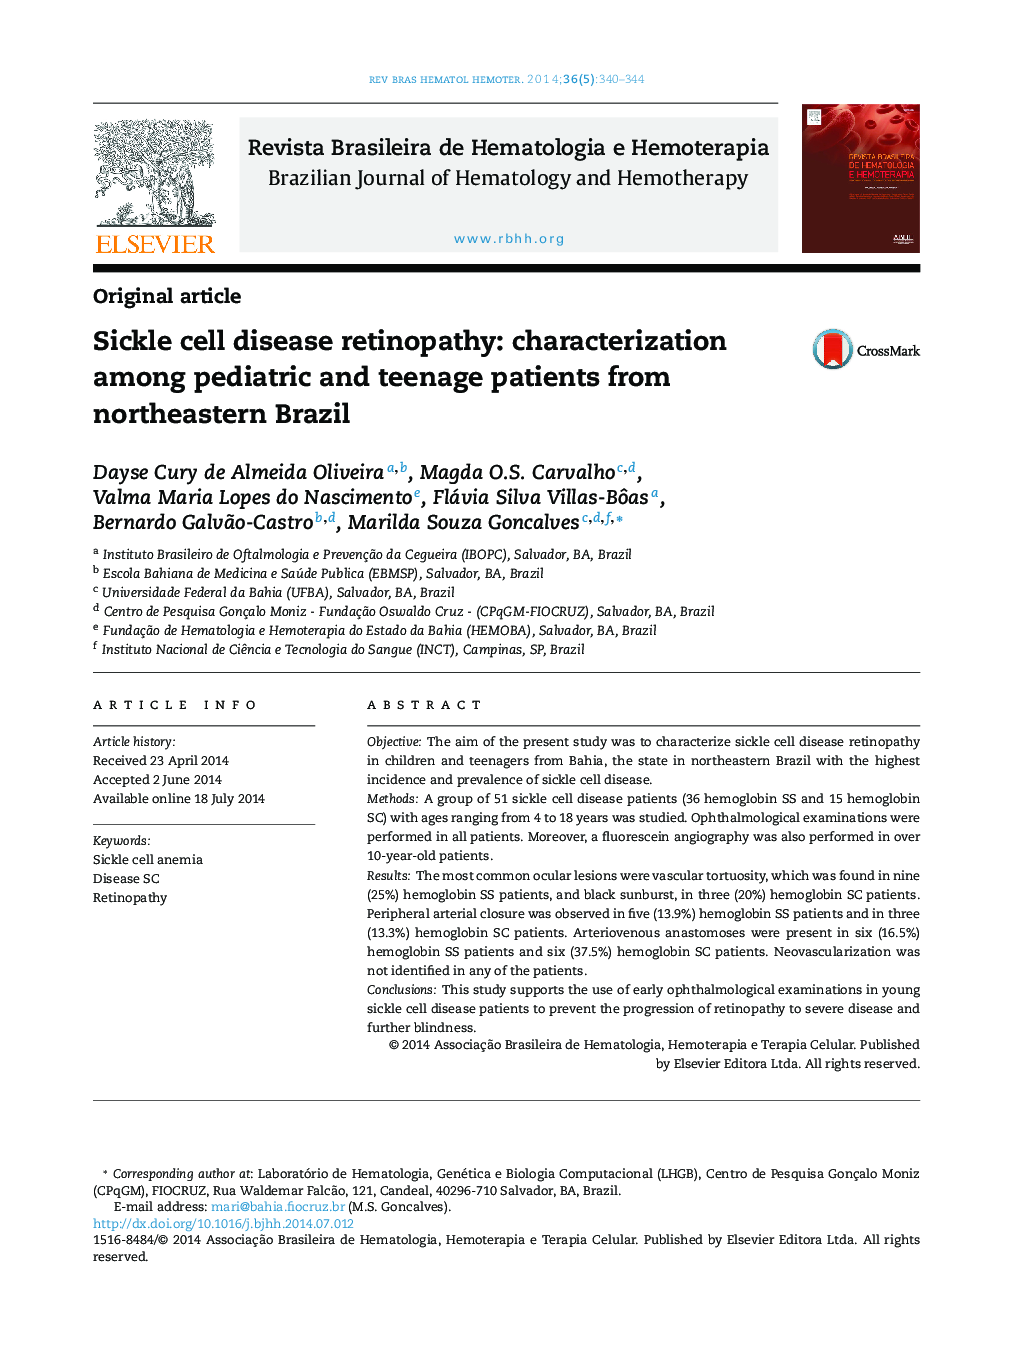 Sickle cell disease retinopathy: characterization among pediatric and teenage patients from northeastern Brazil